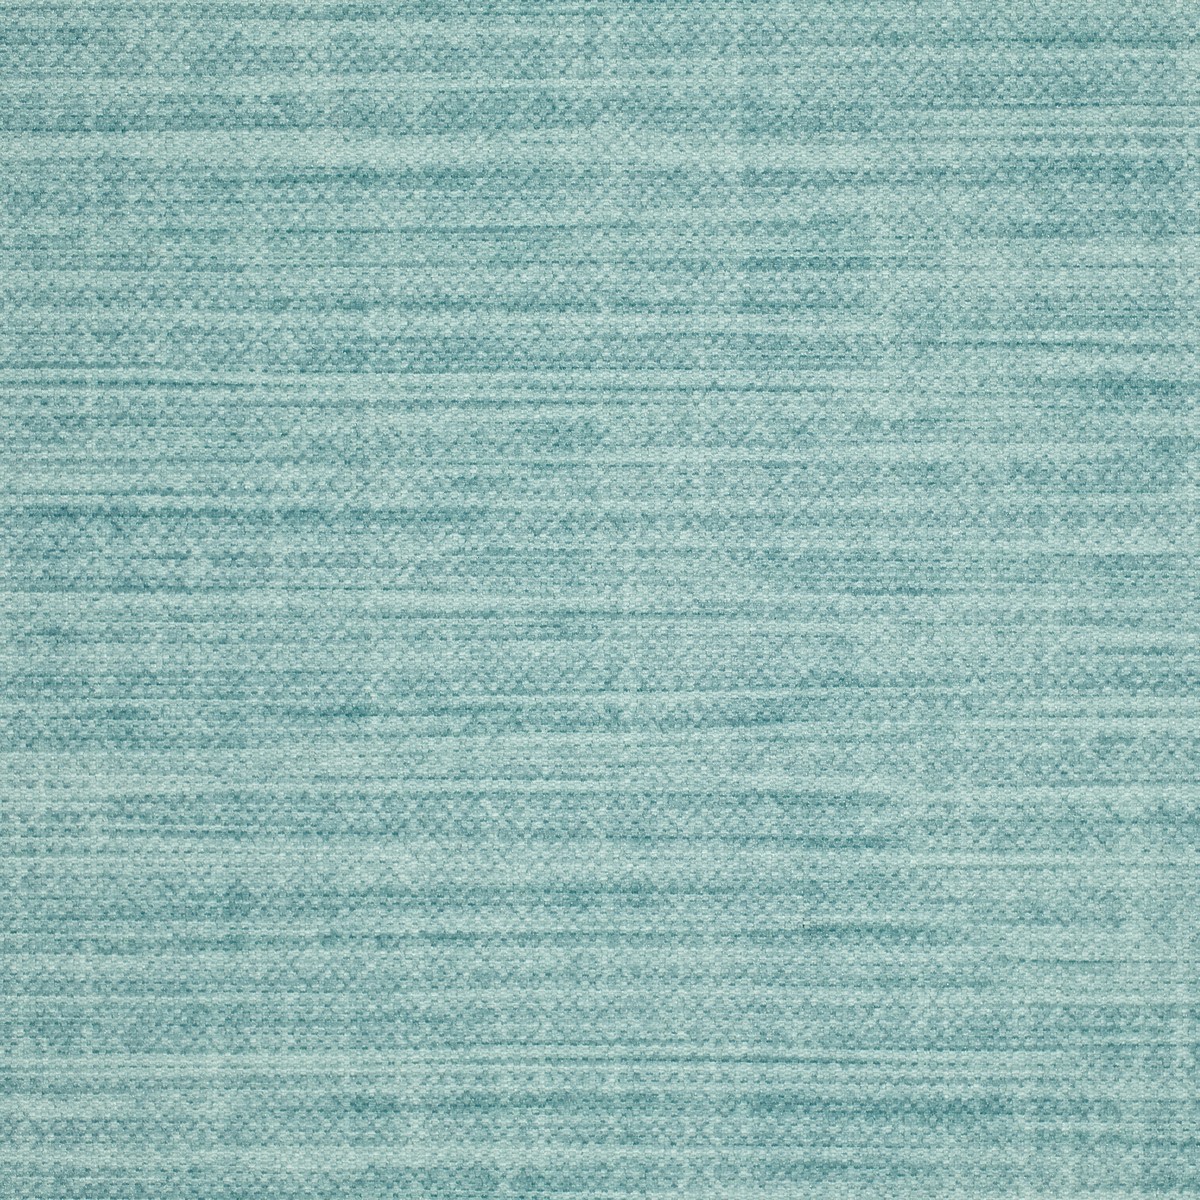 Safi Light Blue Fabric by Harlequin